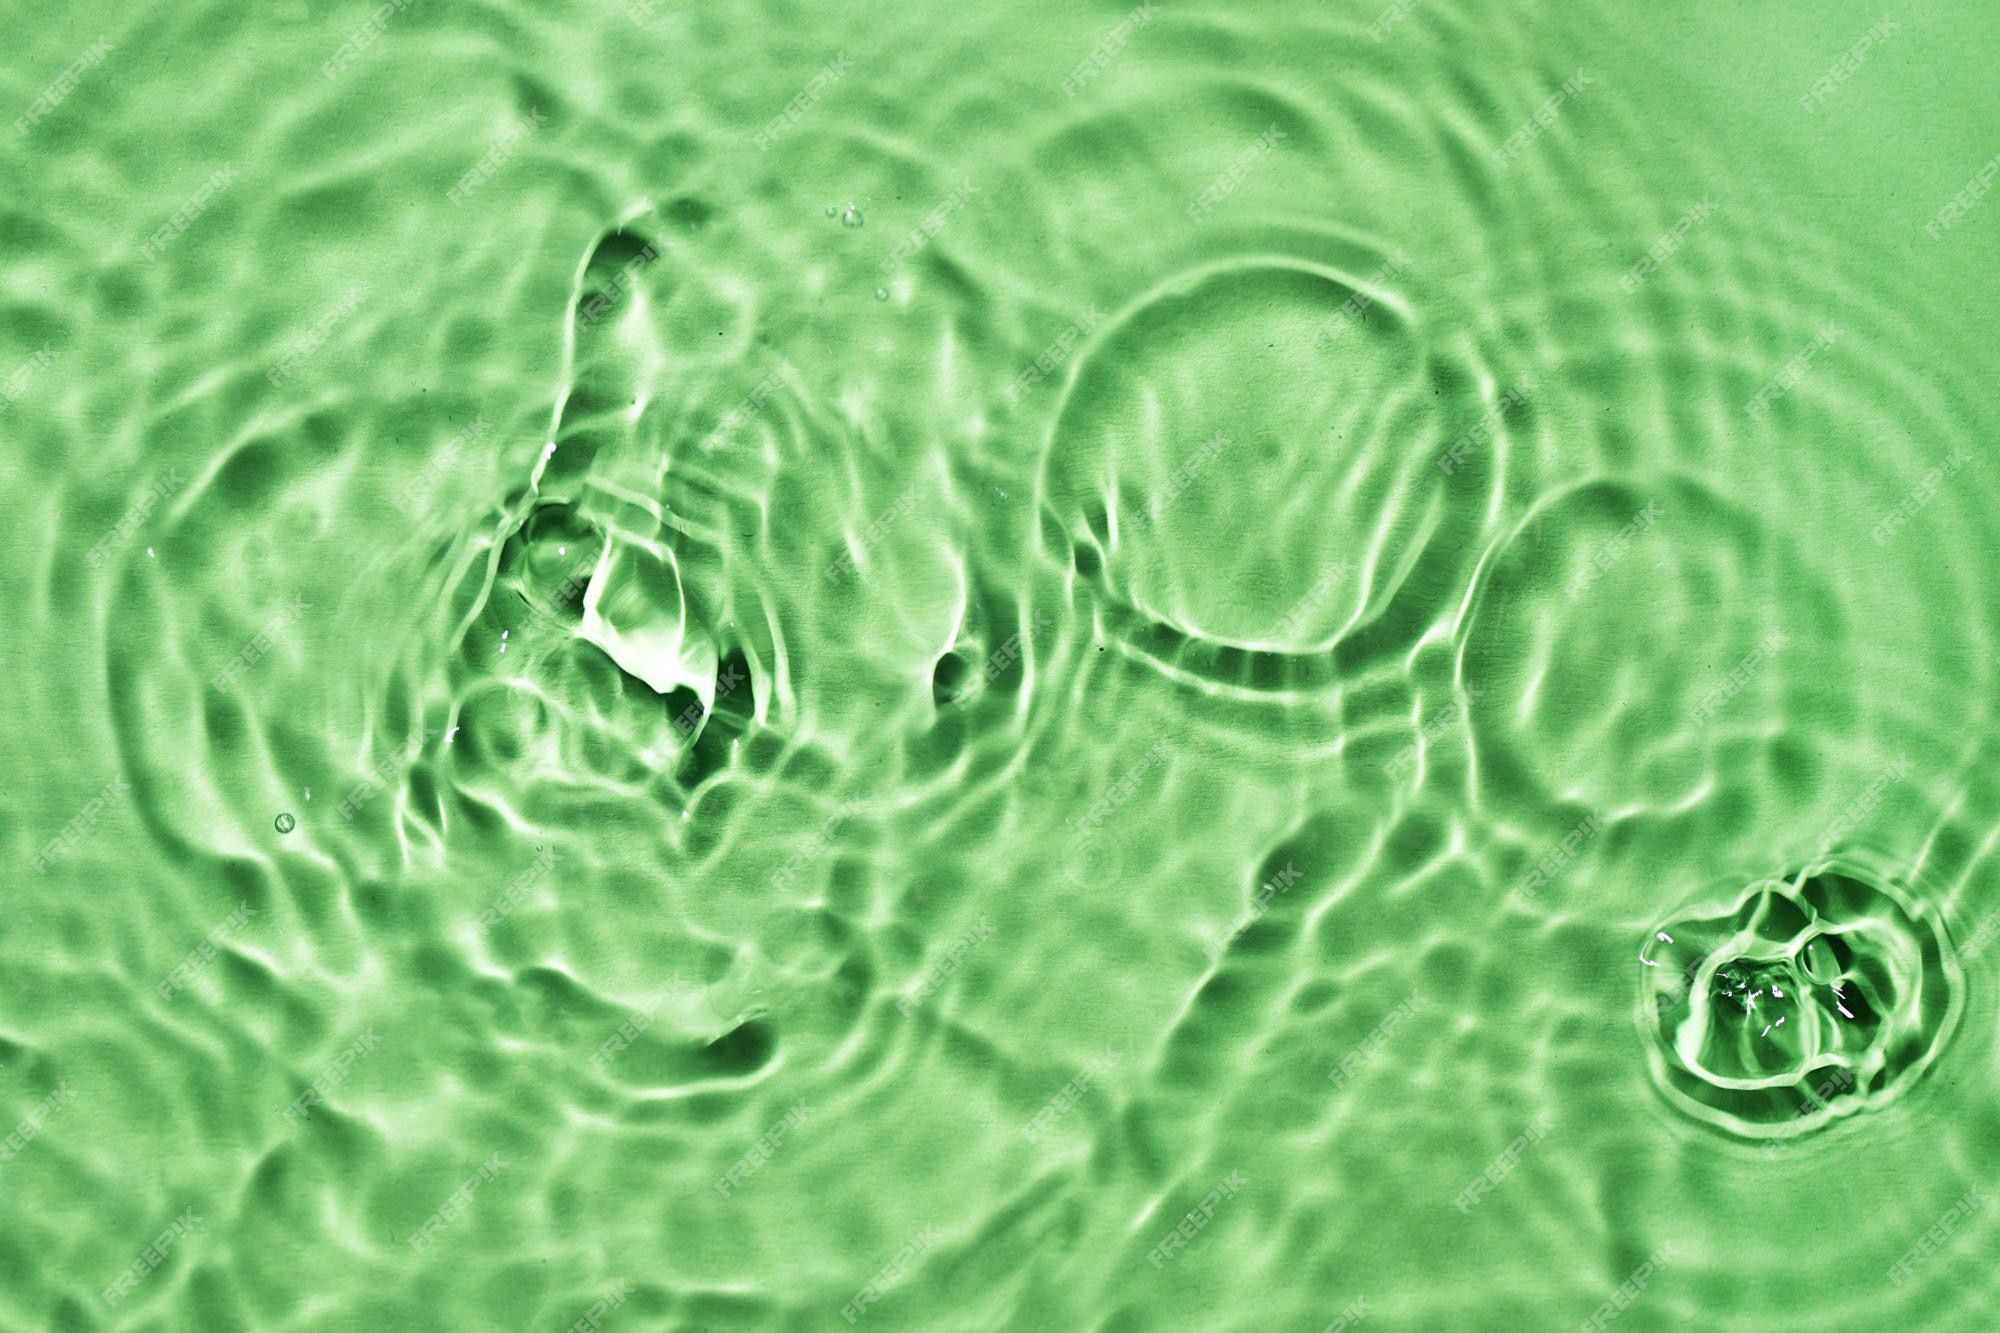 Premium Photo. Light green water surface texture with splashes and bubbles abstract background for natural beauty products green water splashes wallpaper